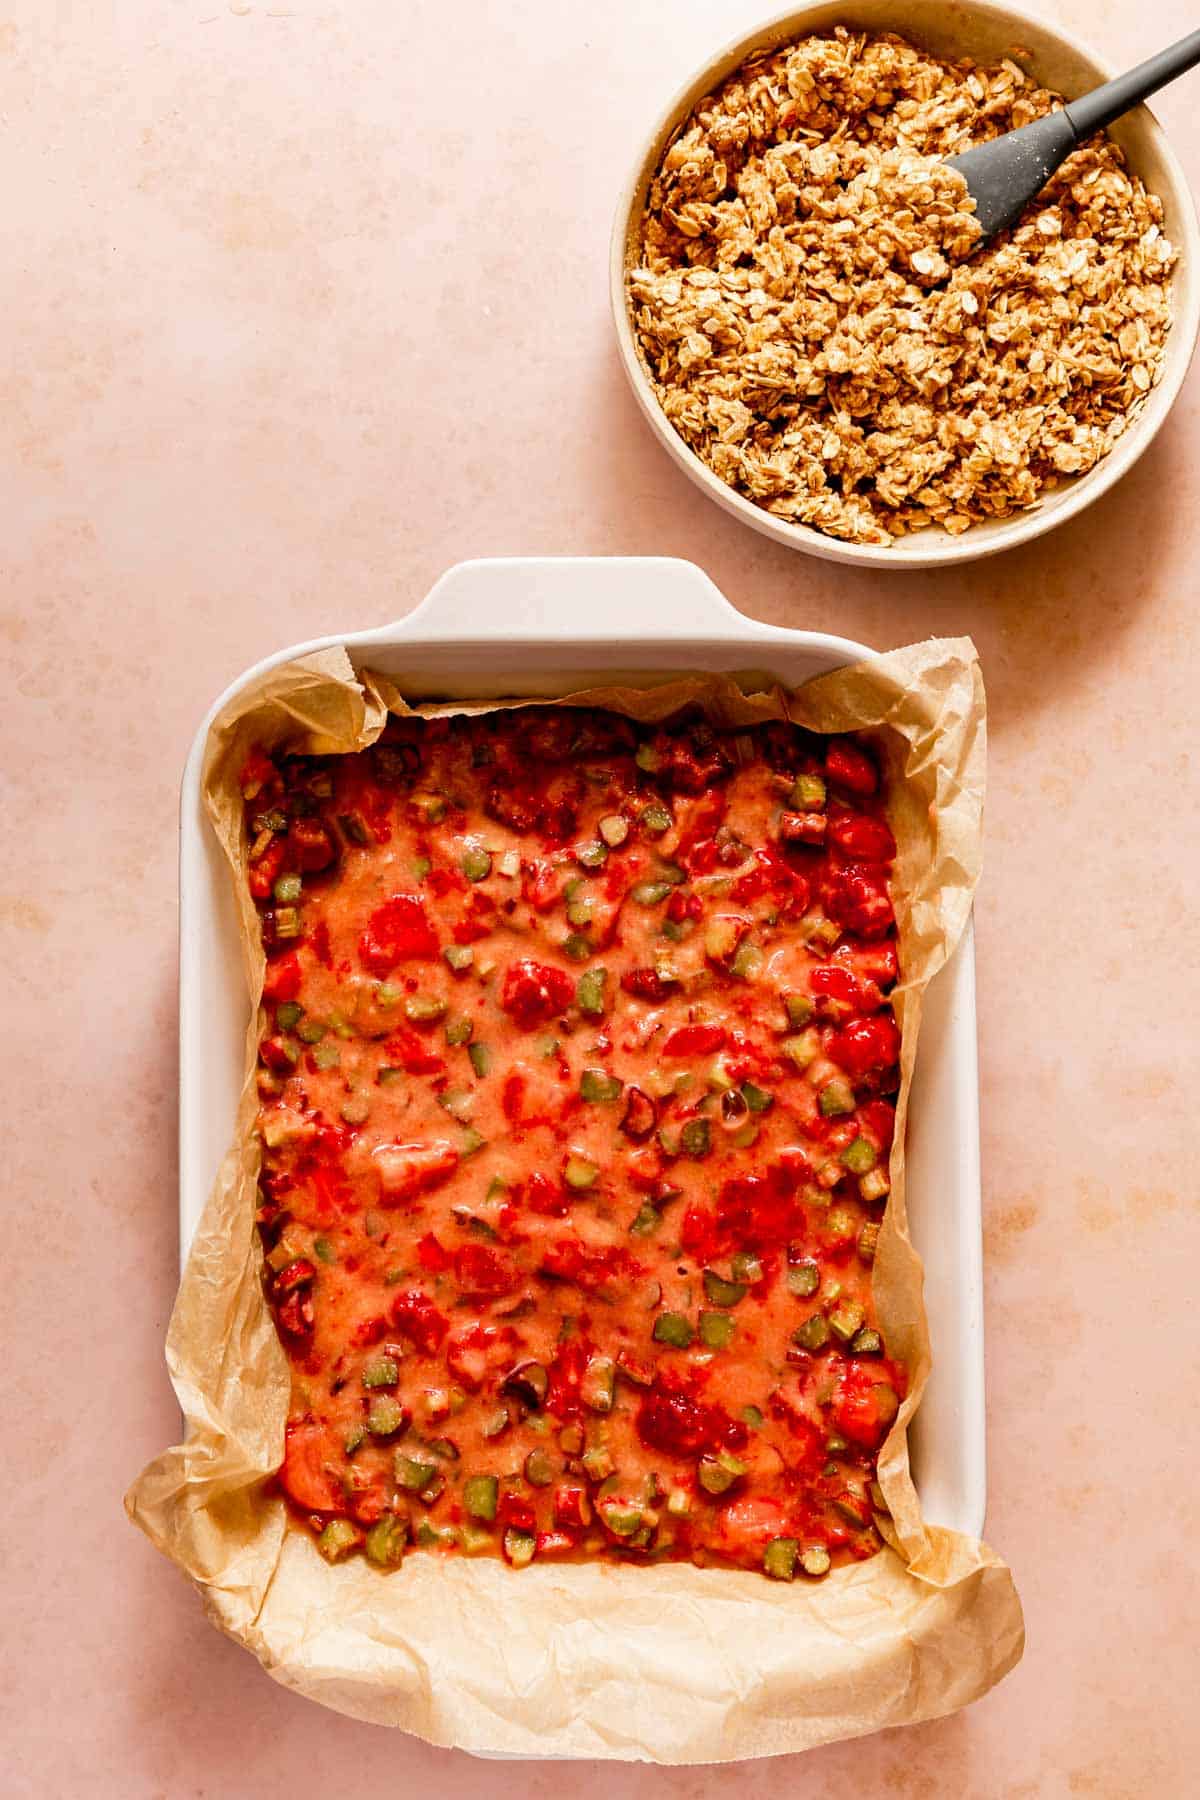 Strawberry and rhubarb in a 9x13 with topping in a bowl above it.